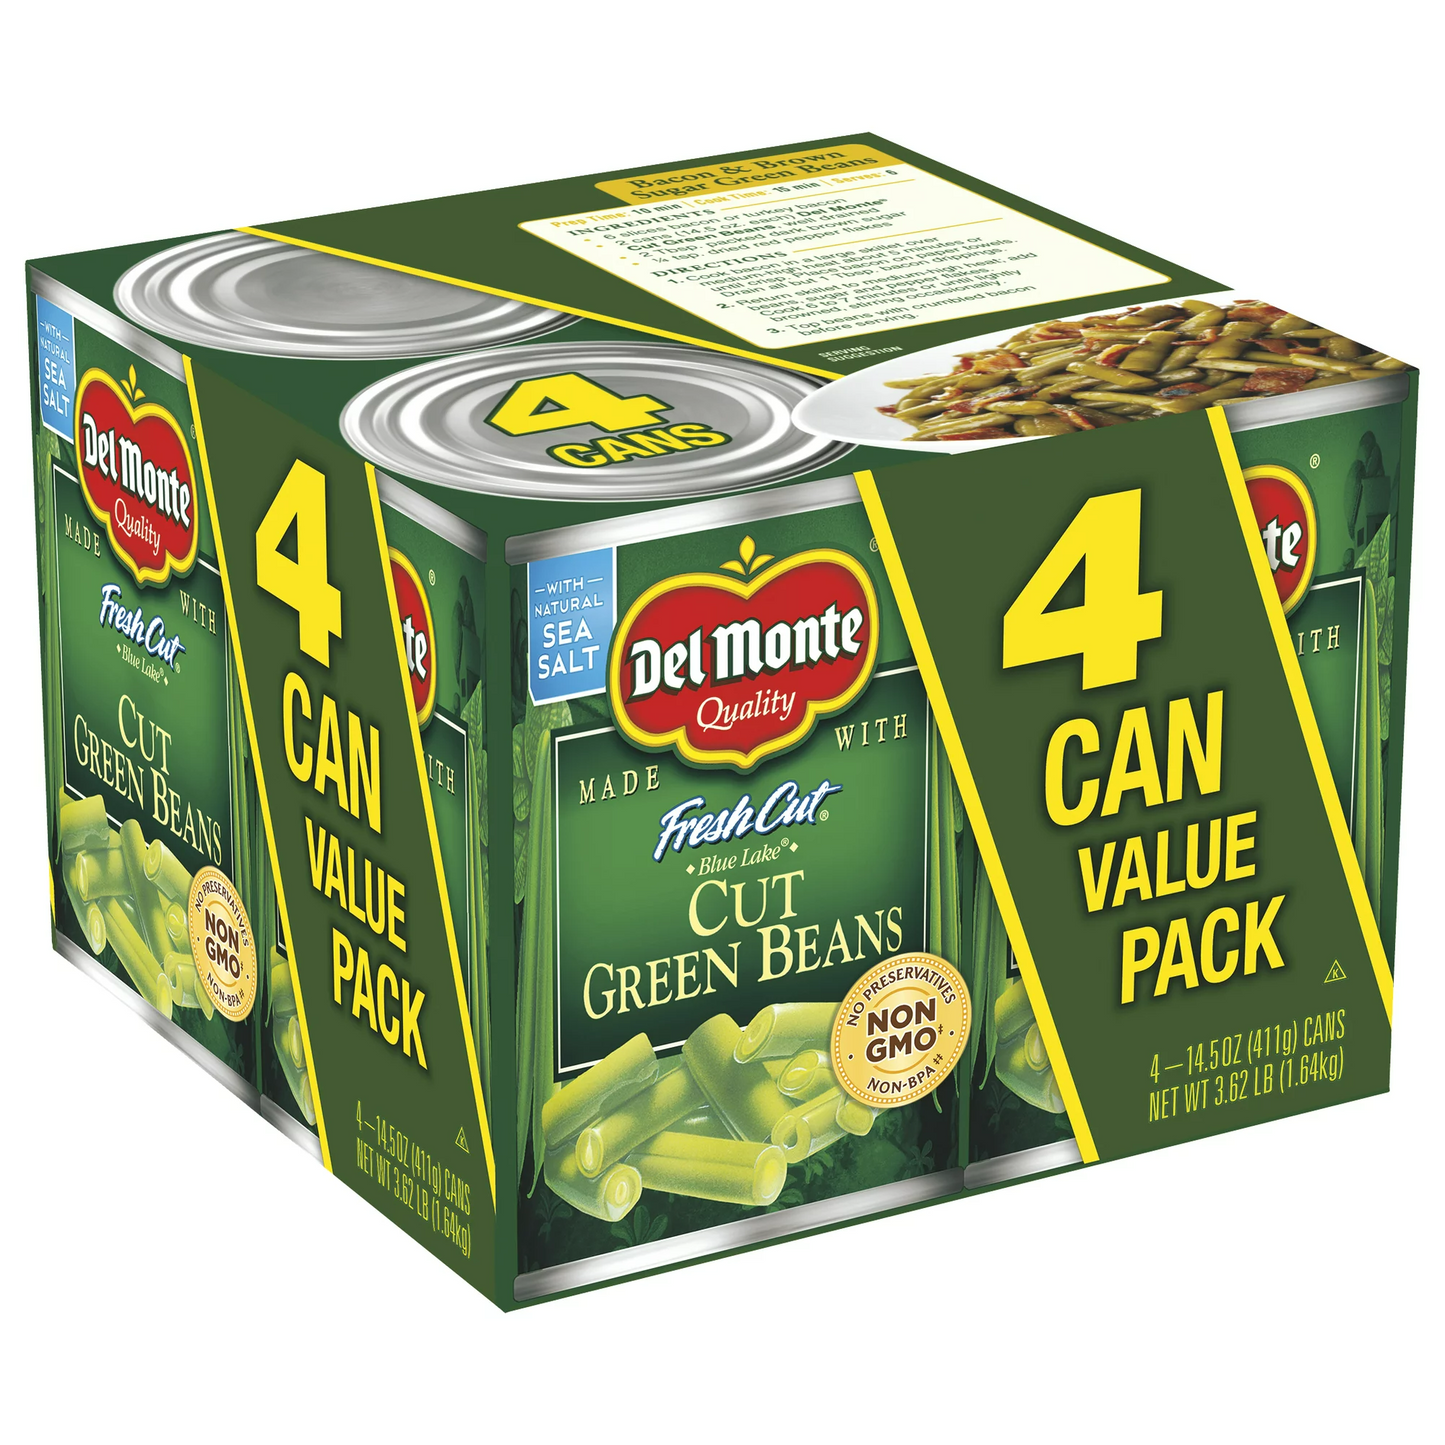 Del Monte Mixed Green Beans, Vegetables, 14.5 oz (4 Cans)